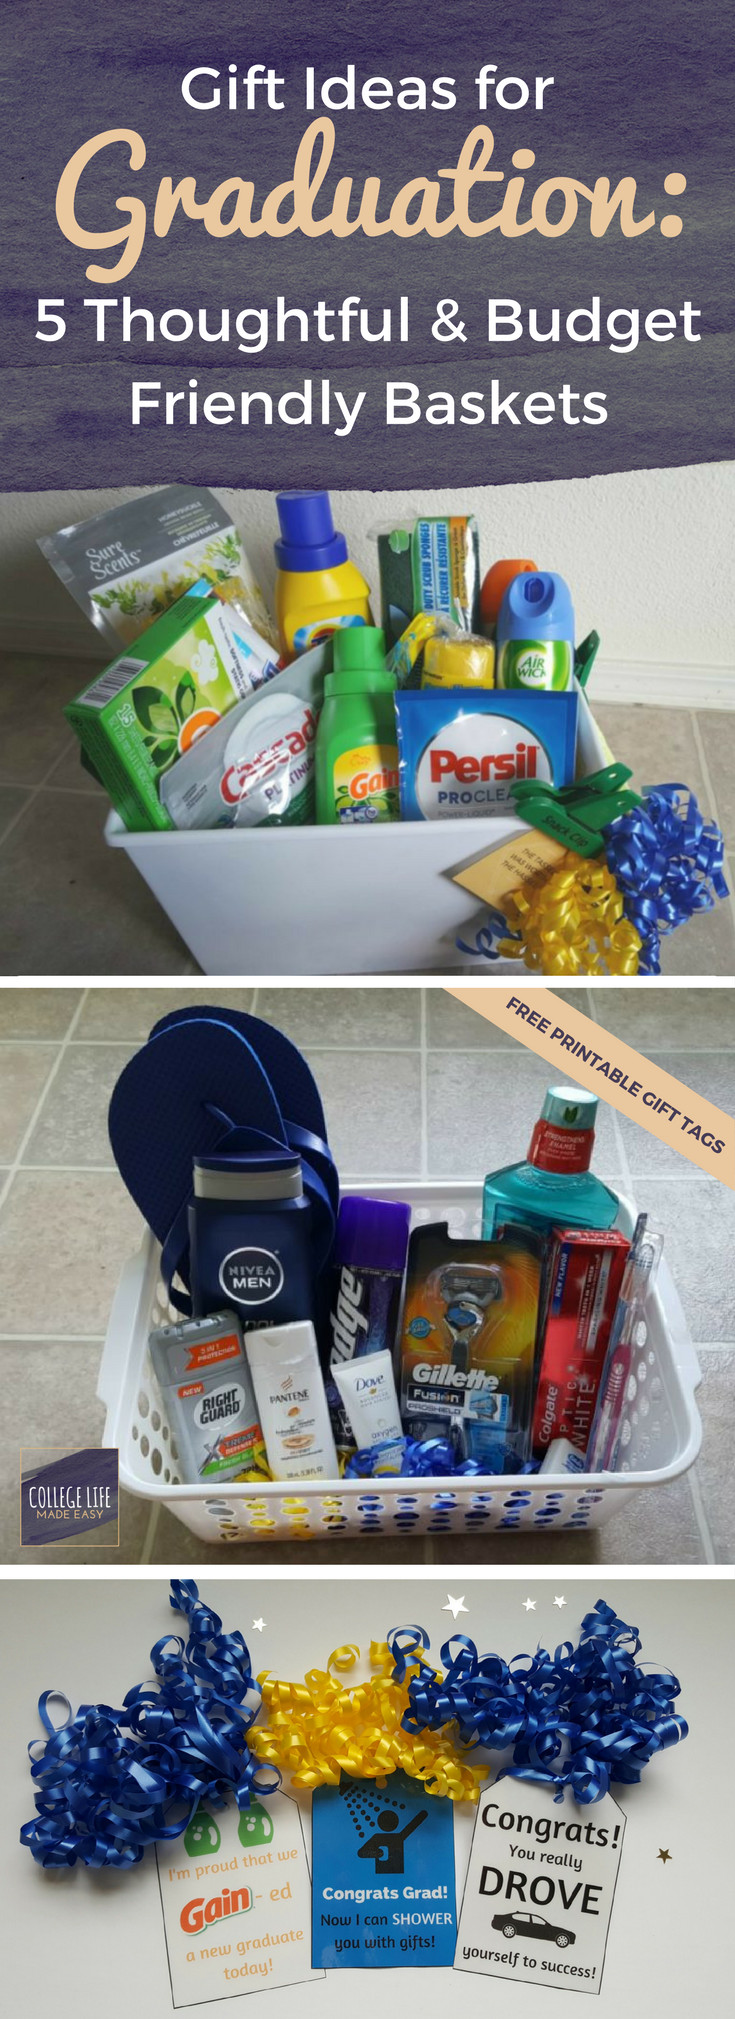 Diy Graduation Gift Ideas For Him
 5 DIY Going Away to College Gift Basket Ideas for Boys